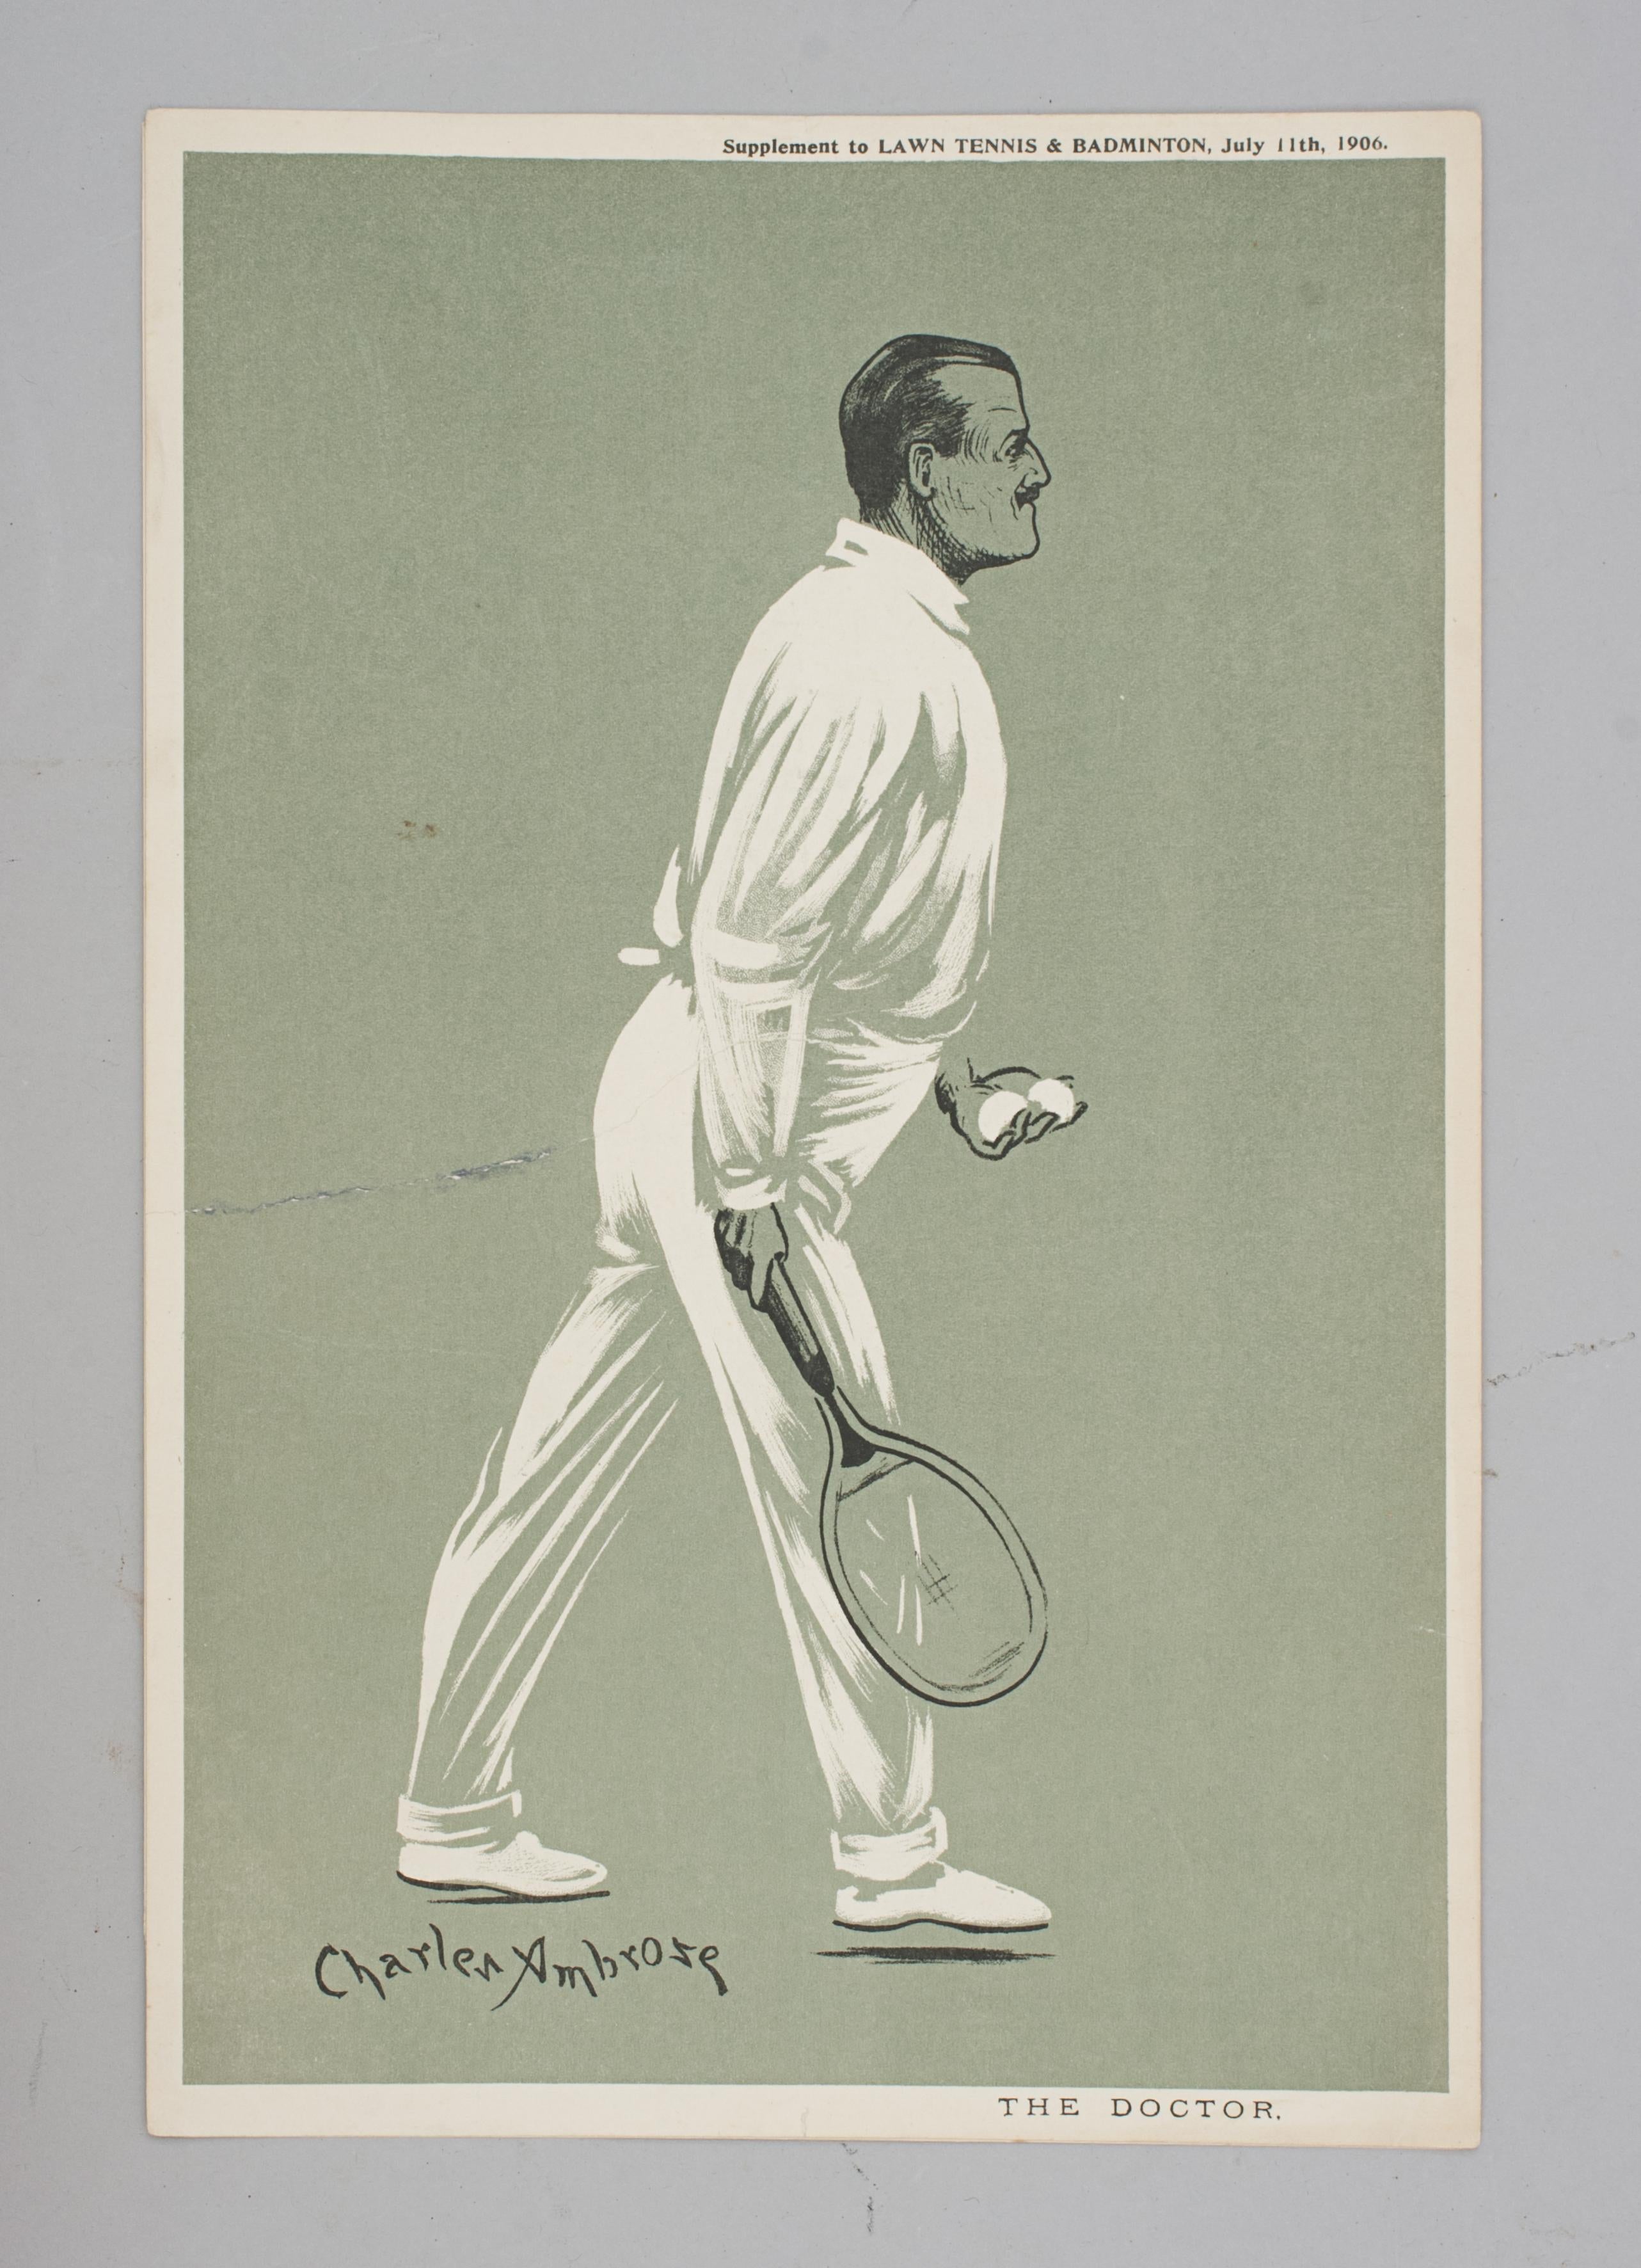 British Collection of Ten Tennis Prints by Charles Ambrose For Sale